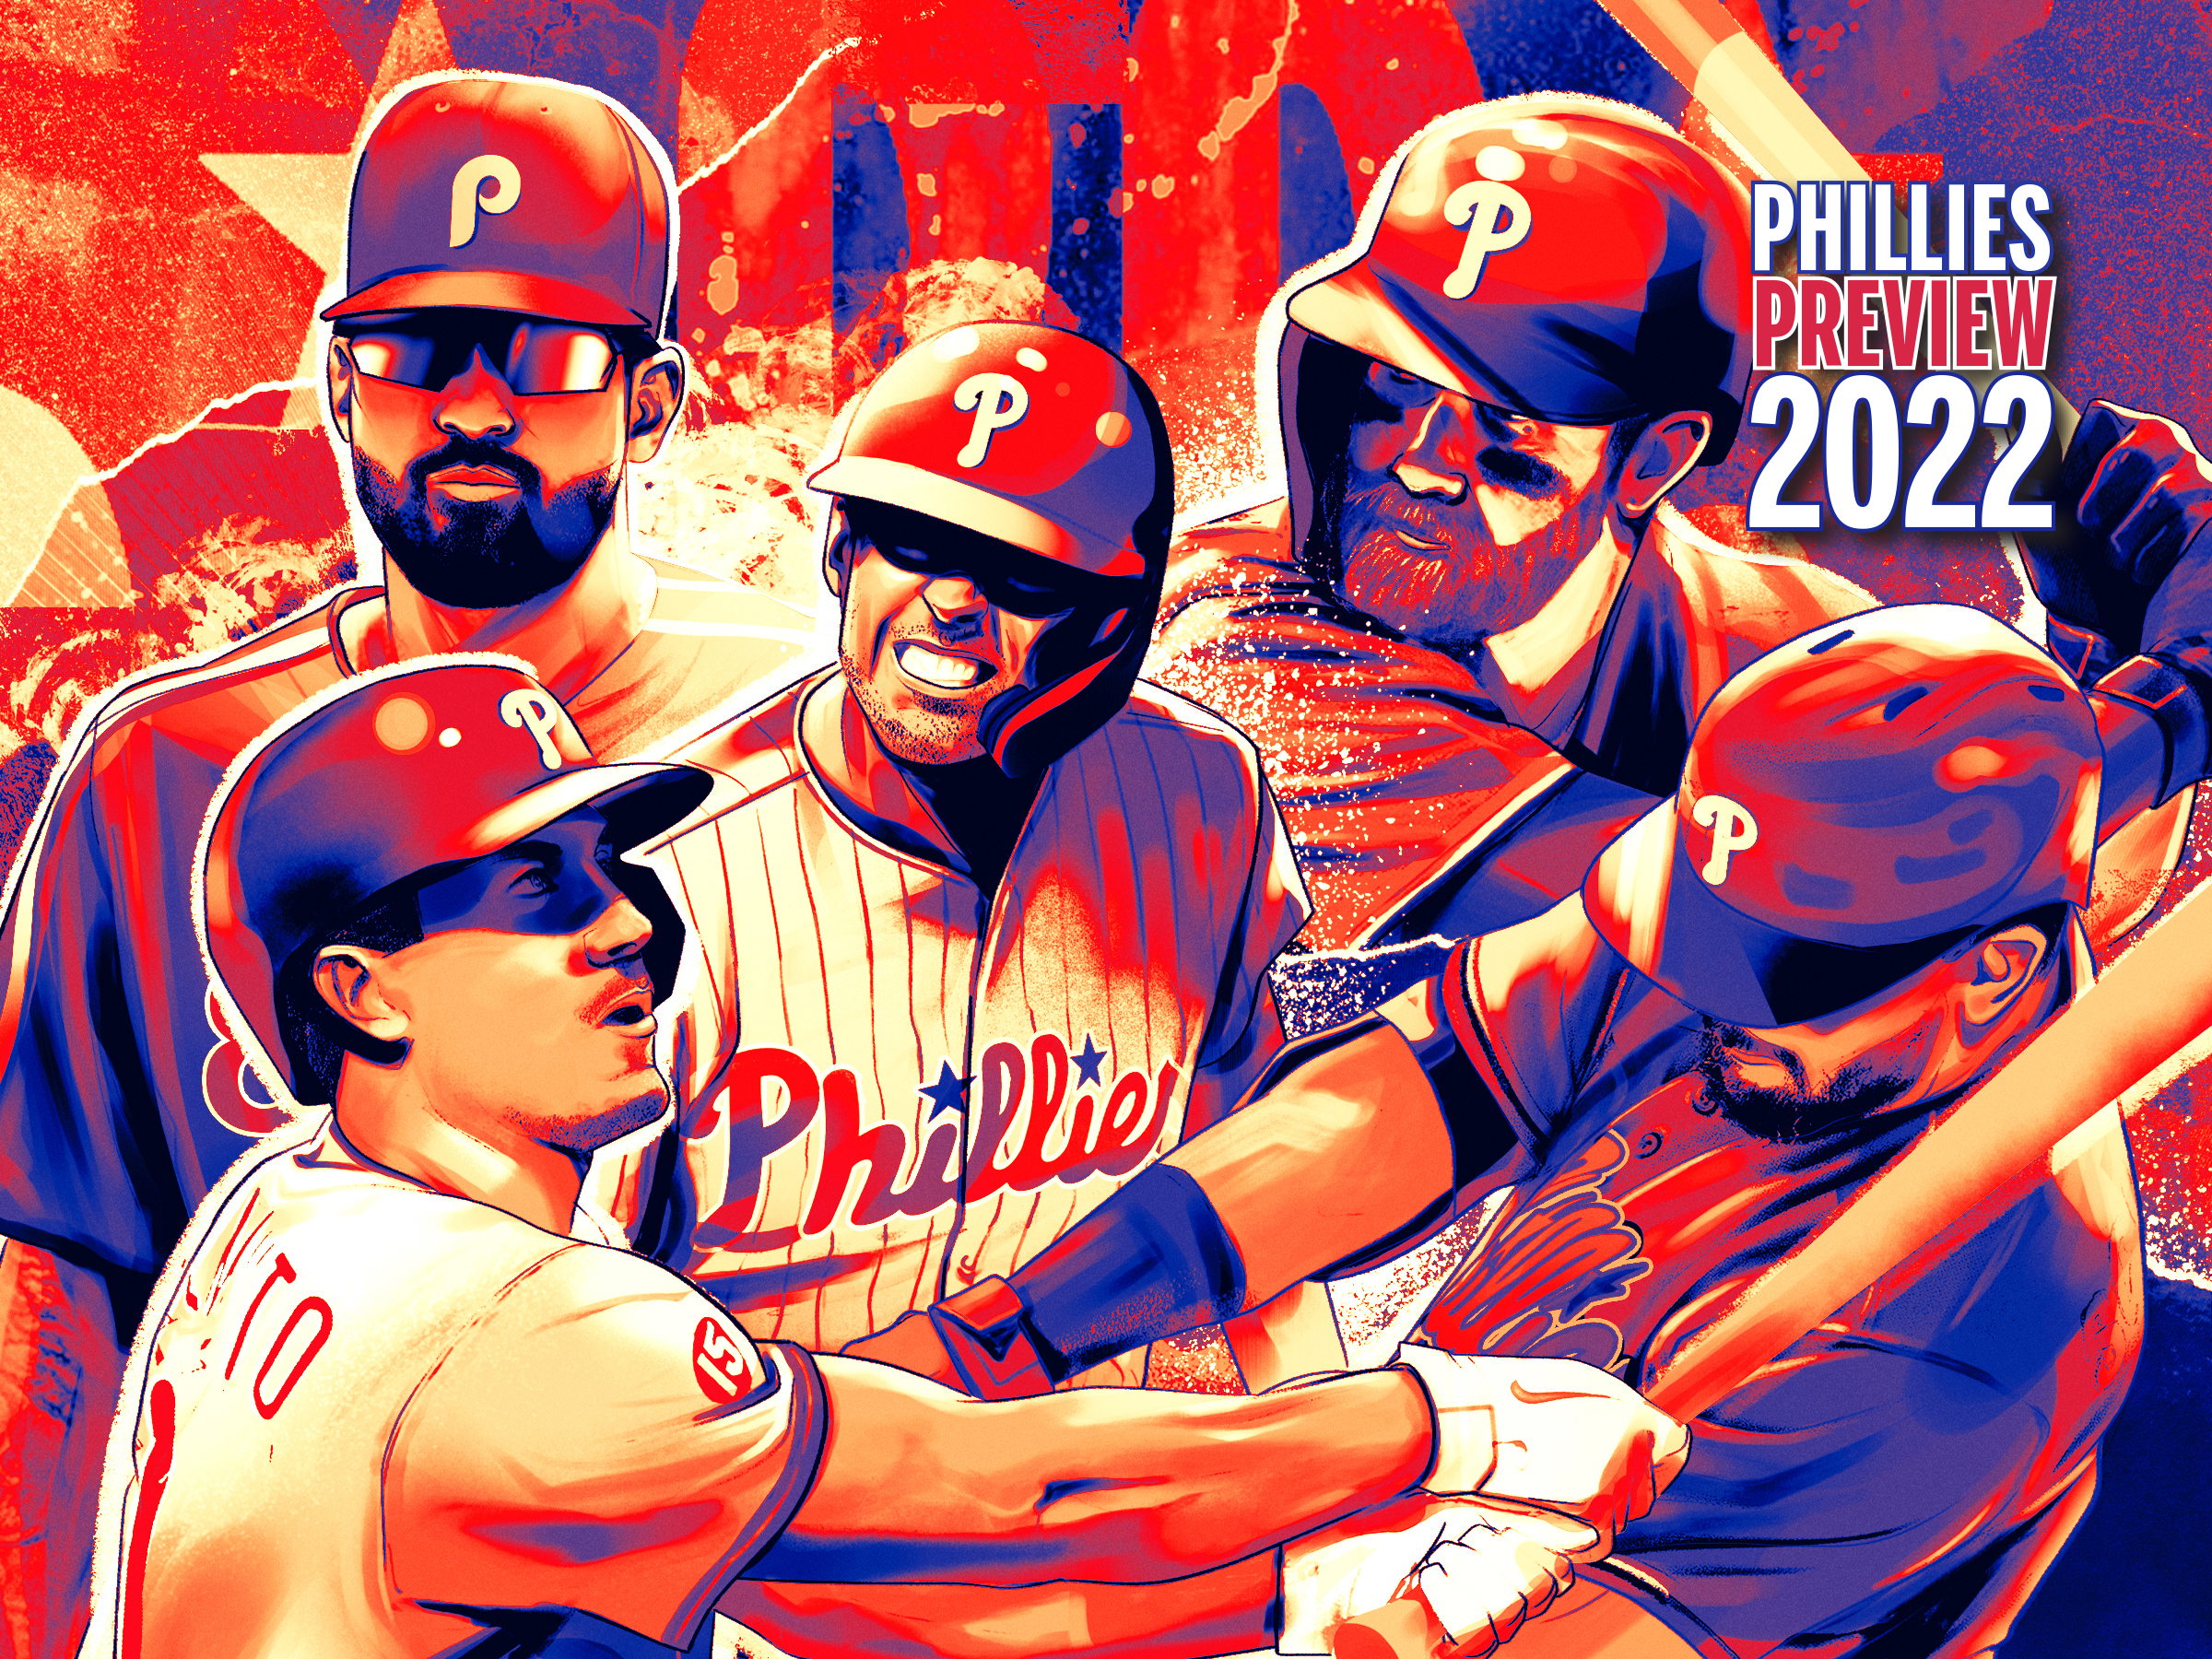 2019 Phillies prediction: GM's trade target